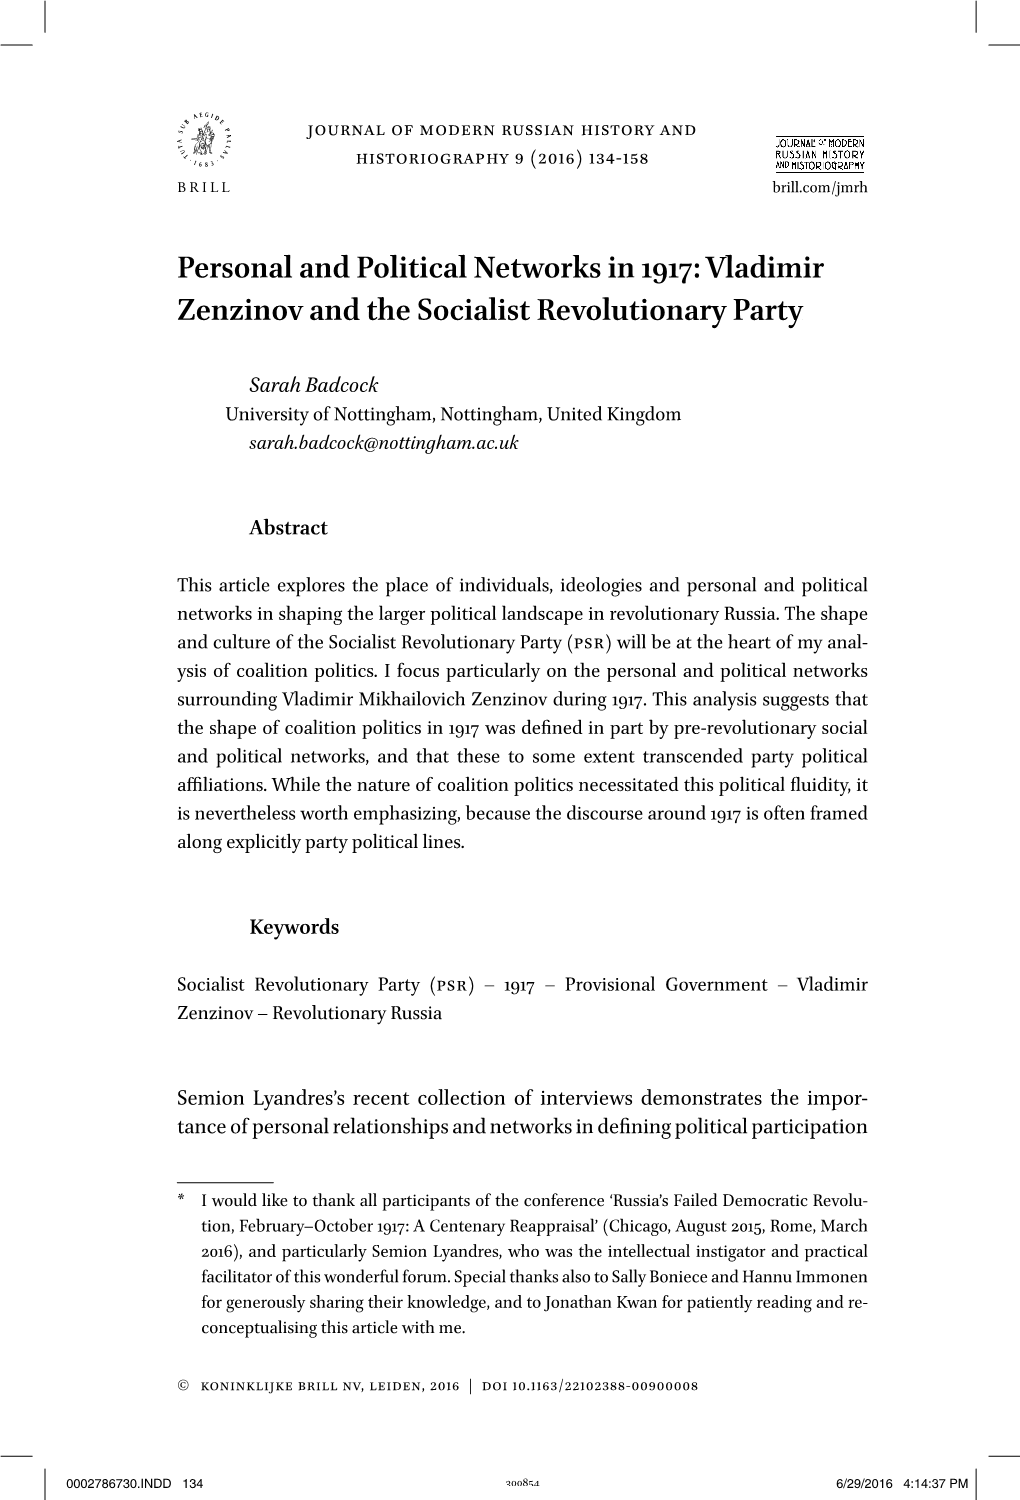 Personal and Political Networks in 1917: Vladimir Zenzinov and The